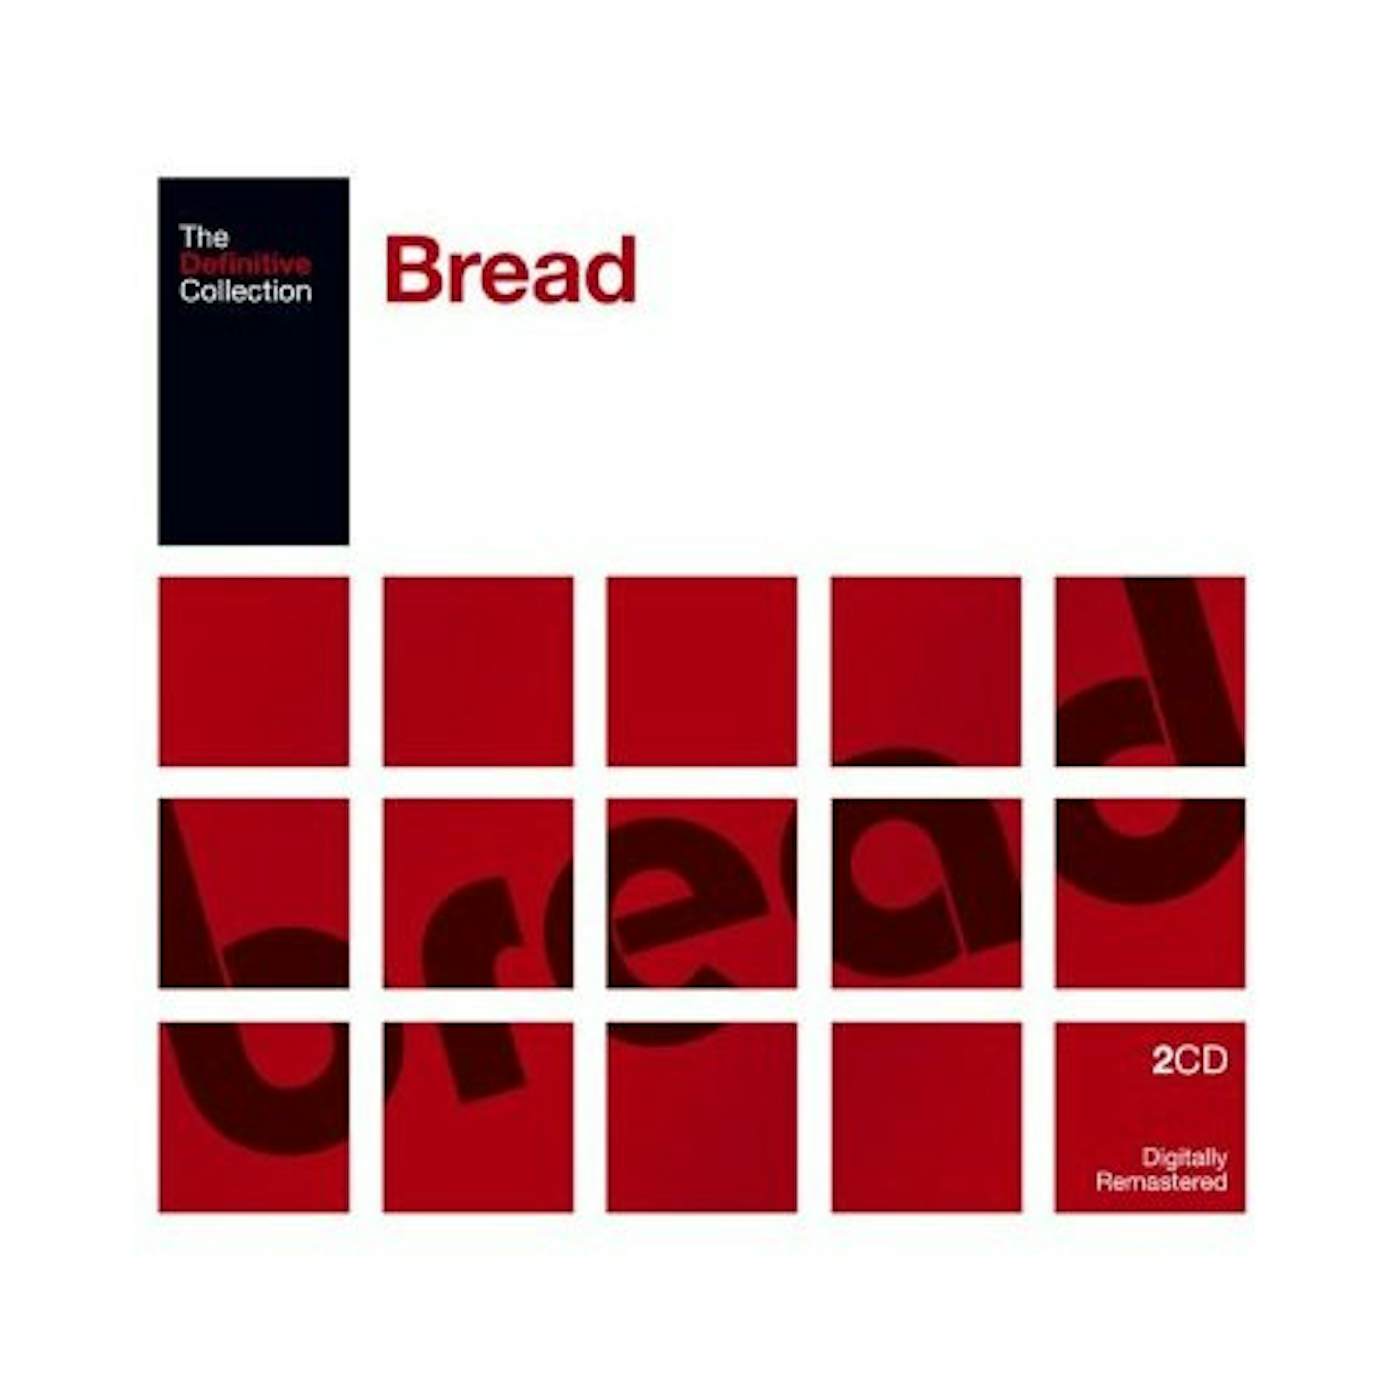 Bread DEFINITIVE COLLECTION CD